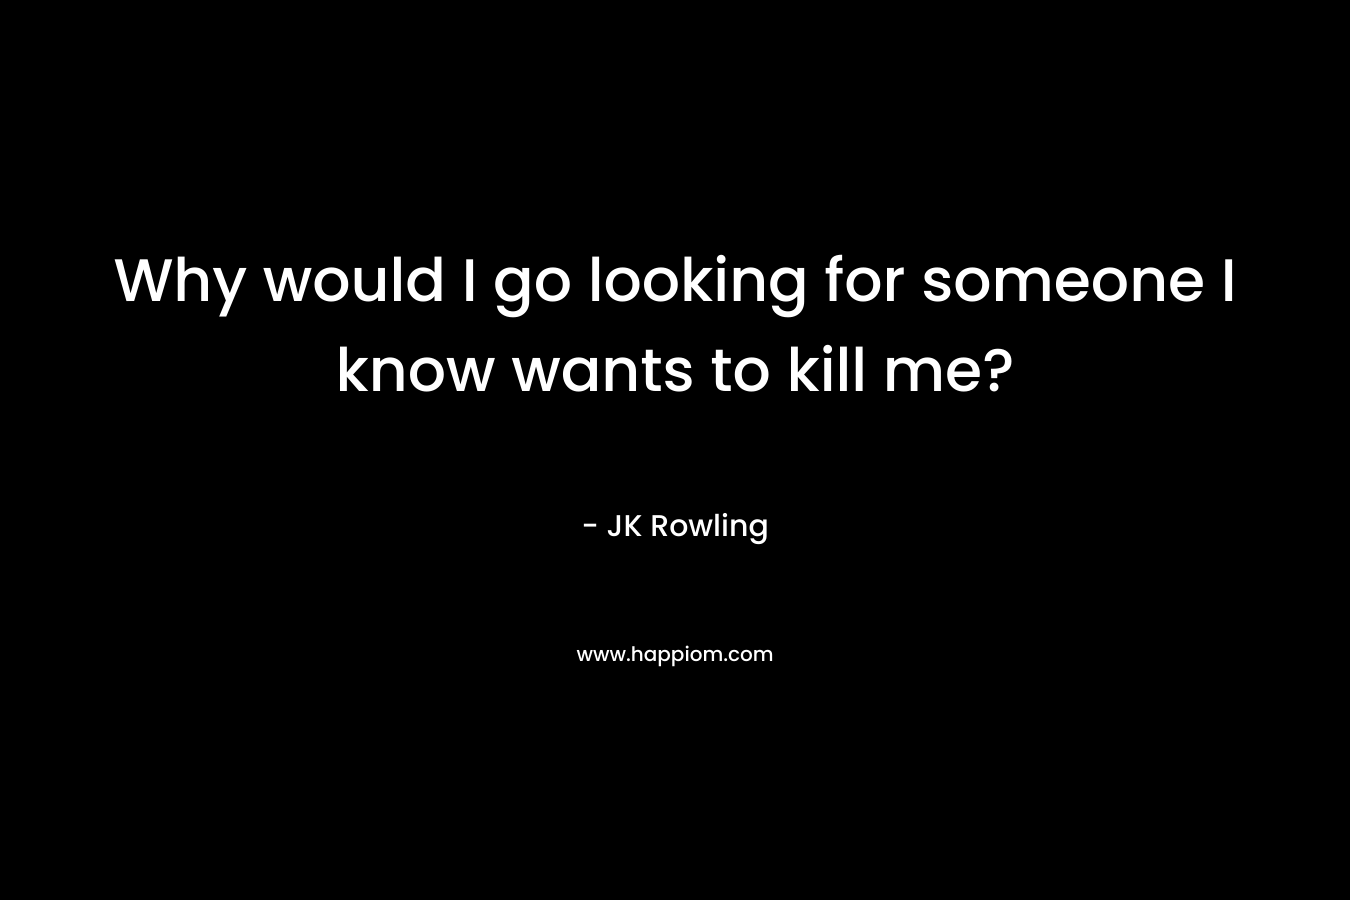 Why would I go looking for someone I know wants to kill me?